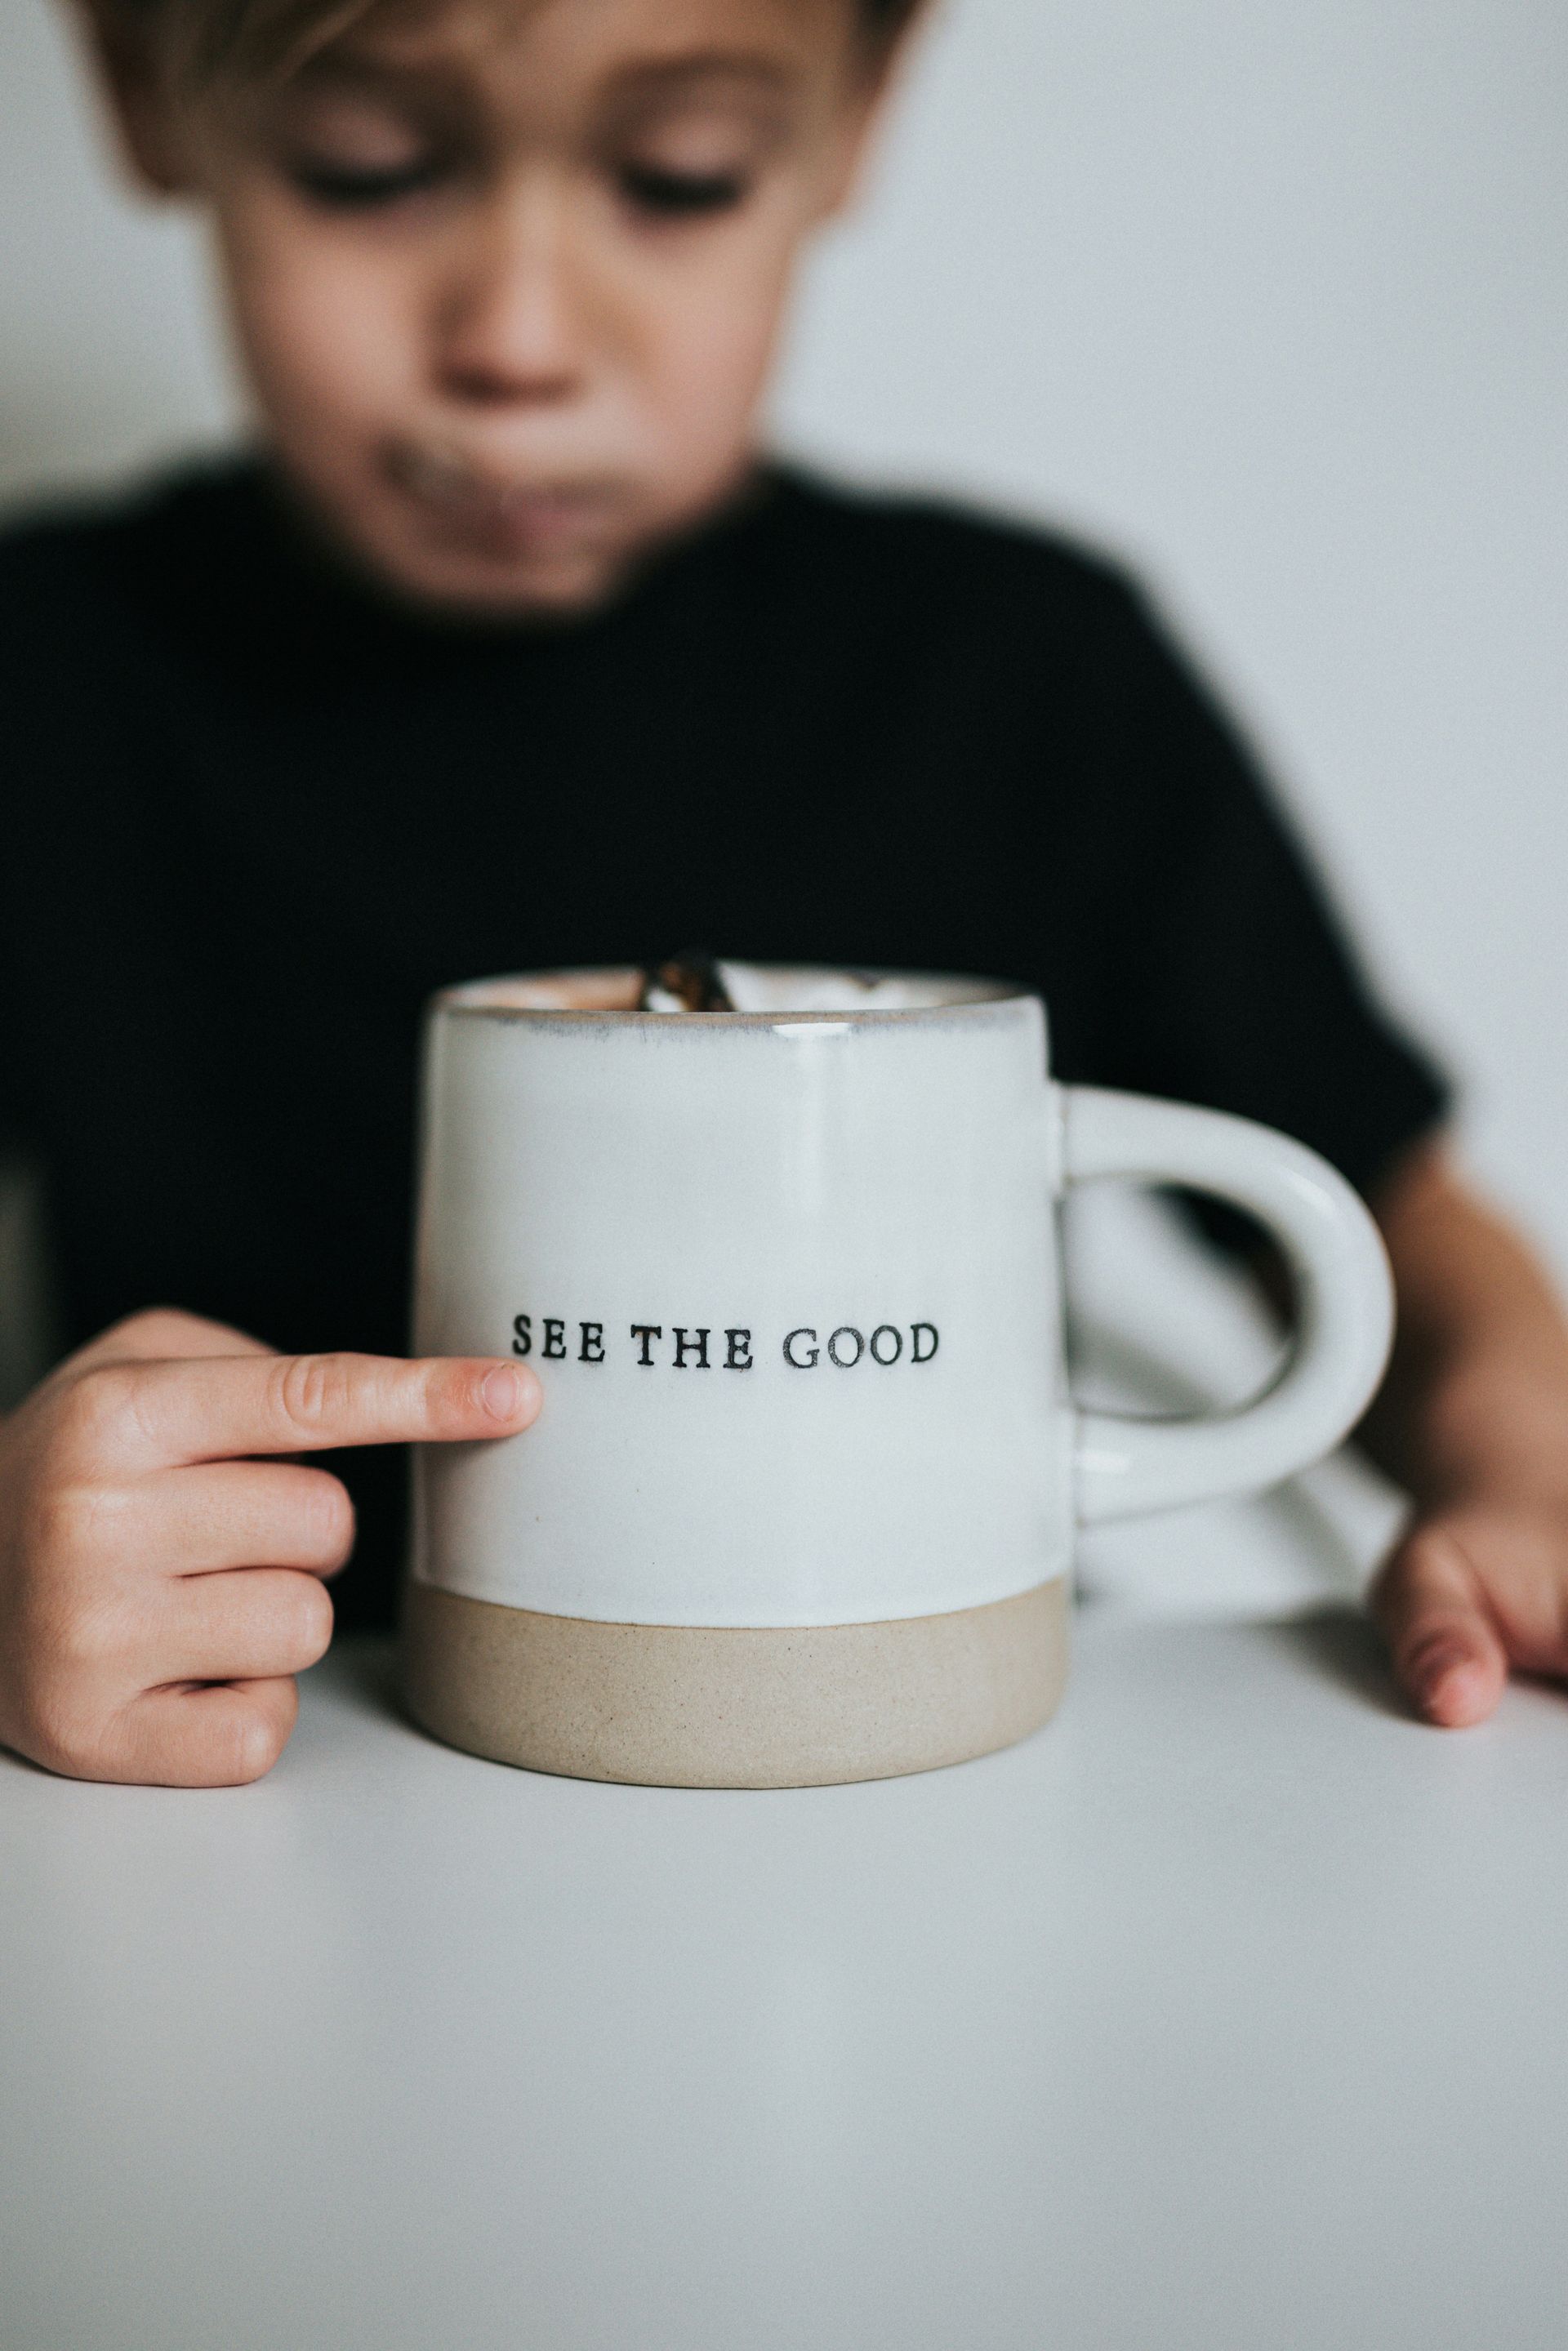 Boy pointing at a mug which has the words 